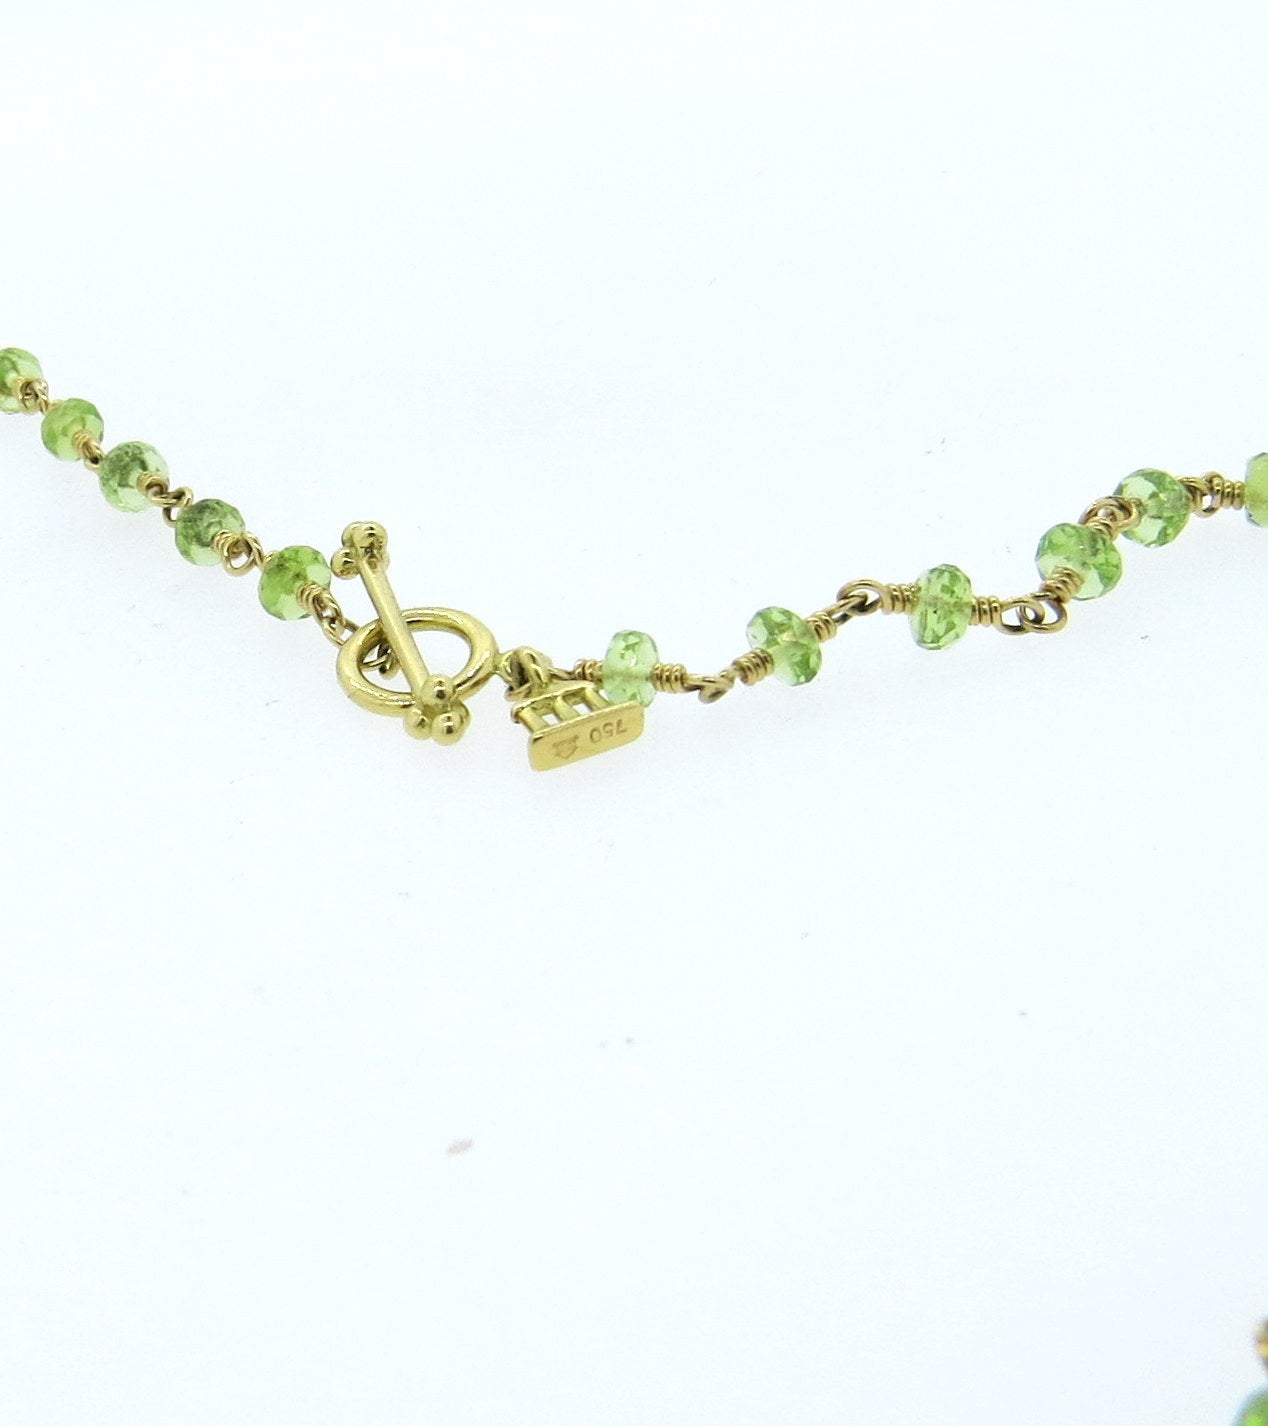 18k gold necklace by Temple St. Clair from Karina collection, featuring peridot beads. Necklace is 24